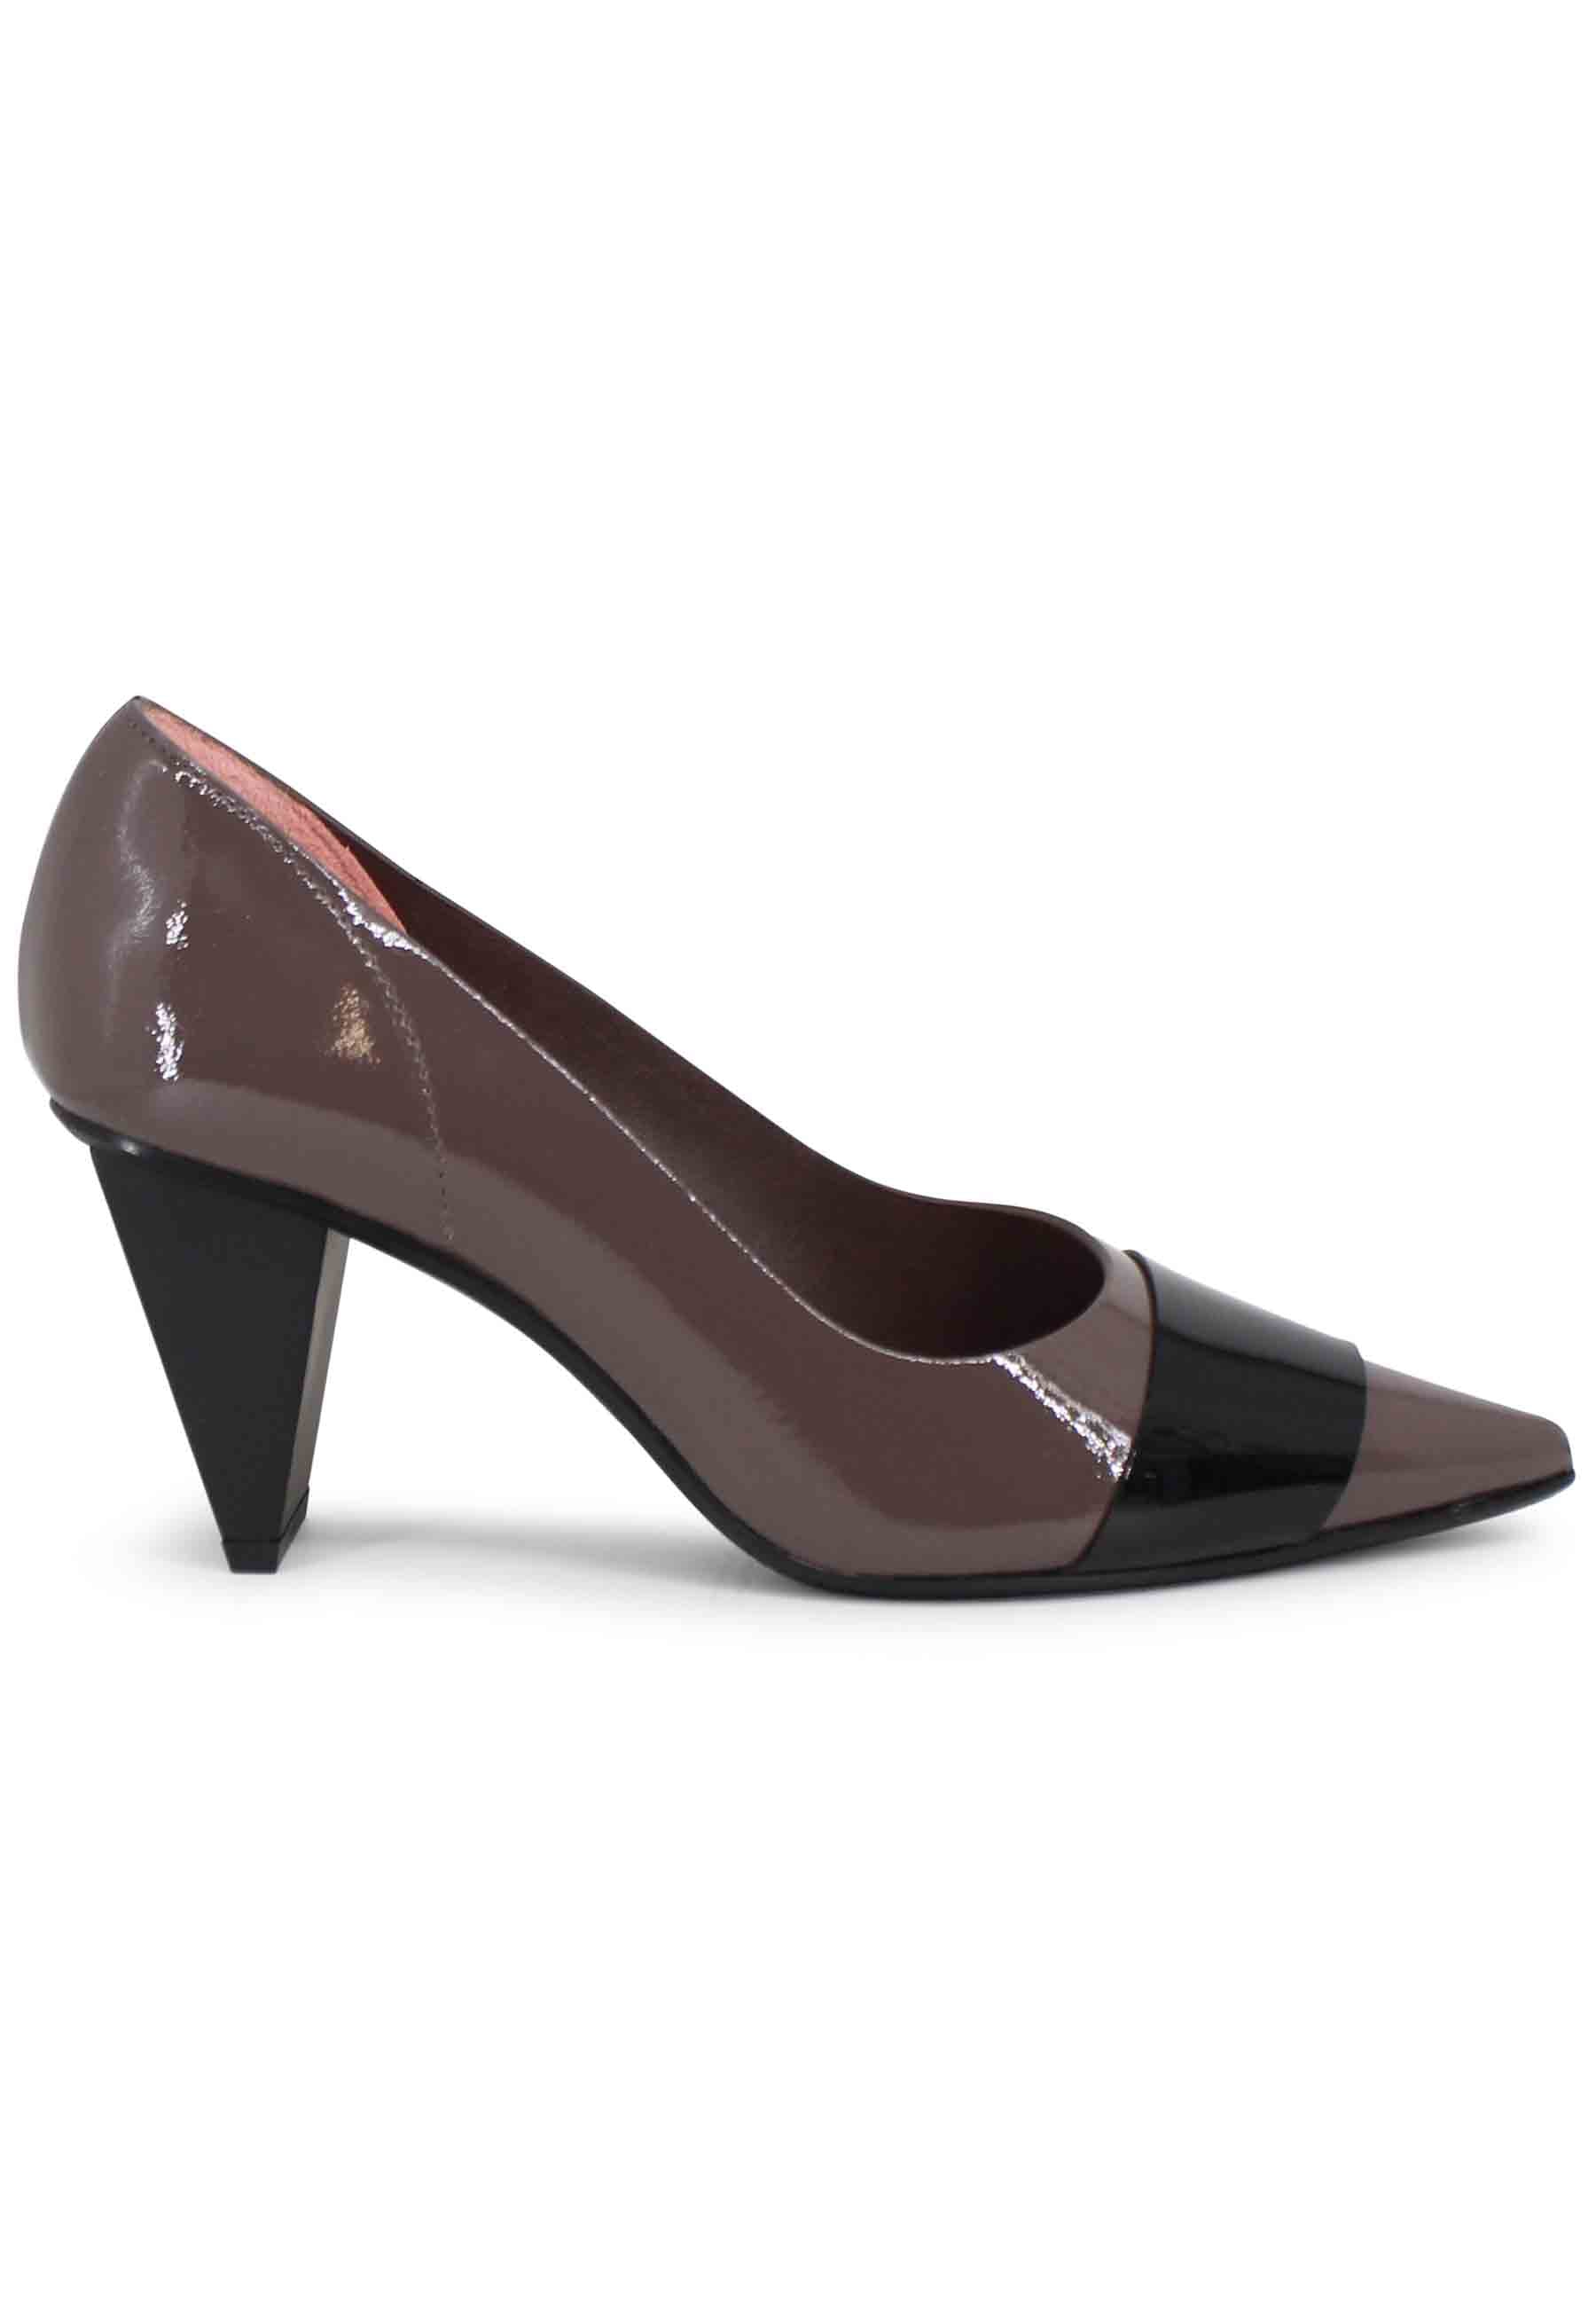 Women's gray patent leather pumps